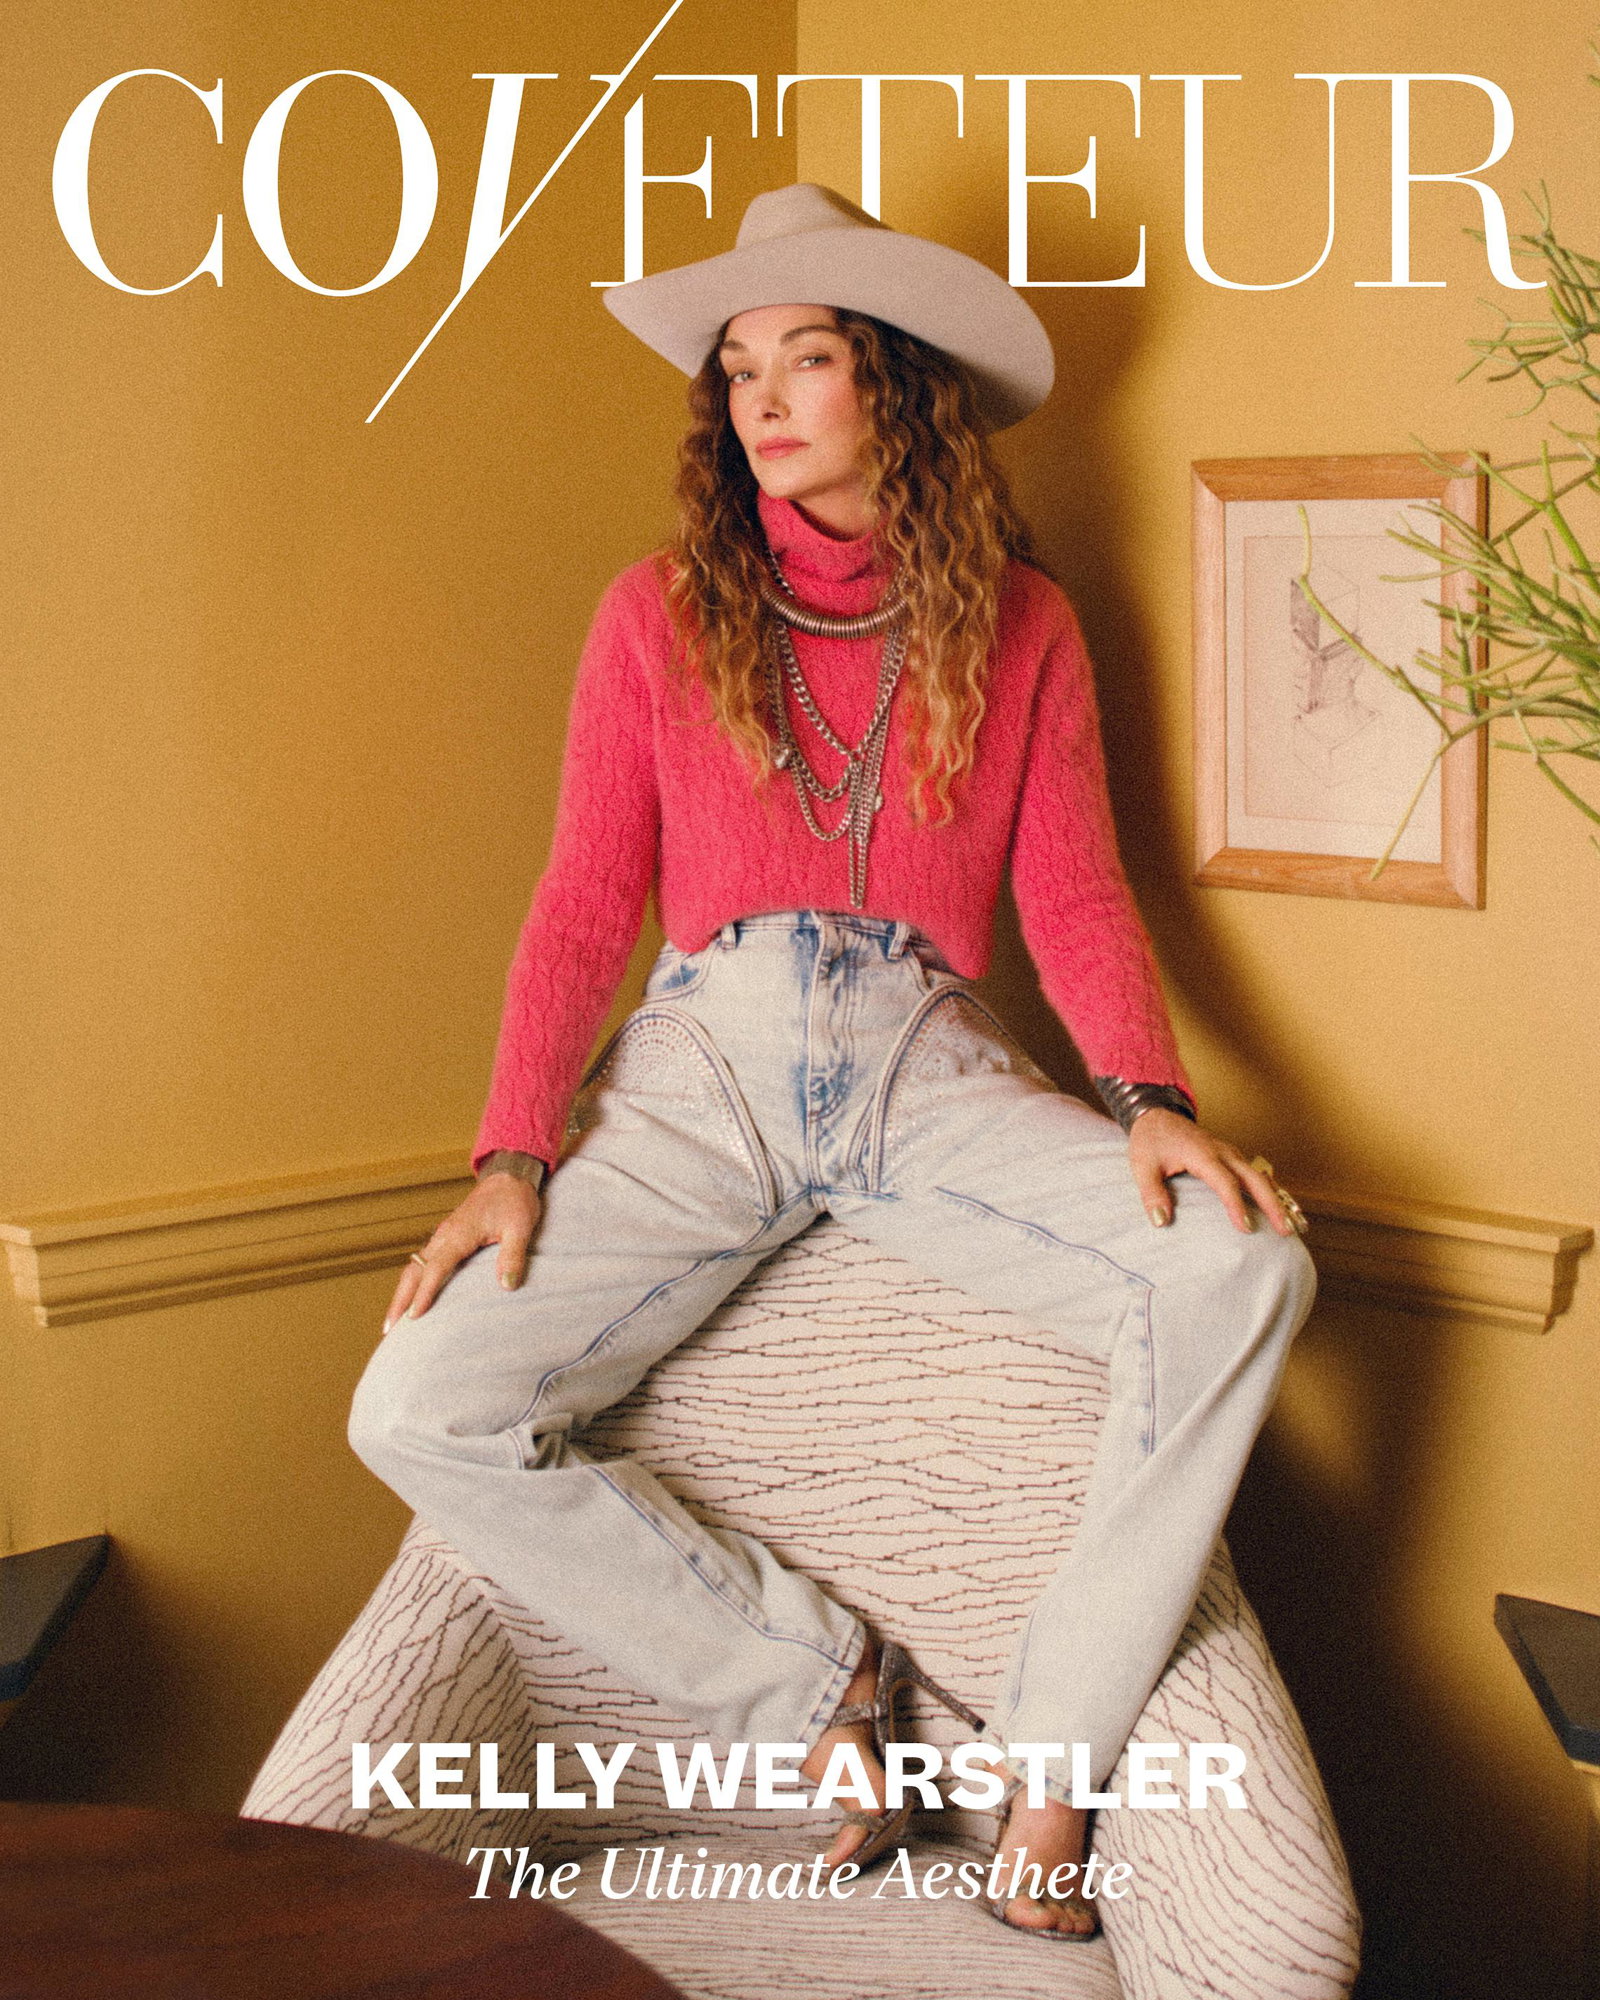 COVETEUR: Meet Our March Cover Star